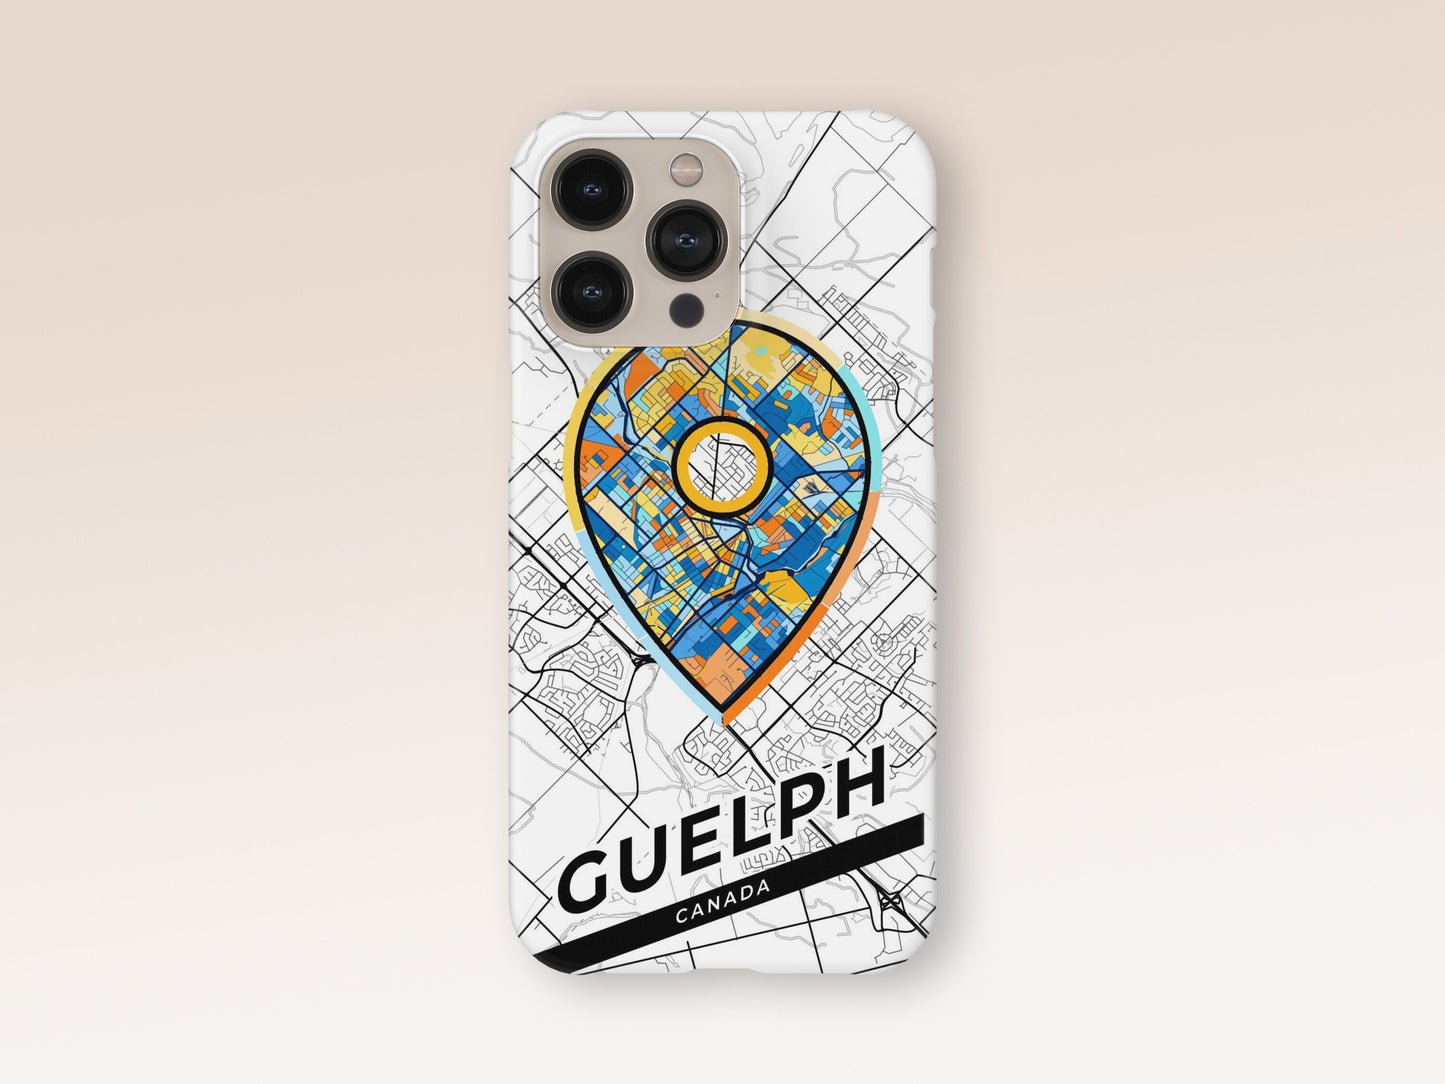 Guelph Canada slim phone case with colorful icon. Birthday, wedding or housewarming gift. Couple match cases. 1